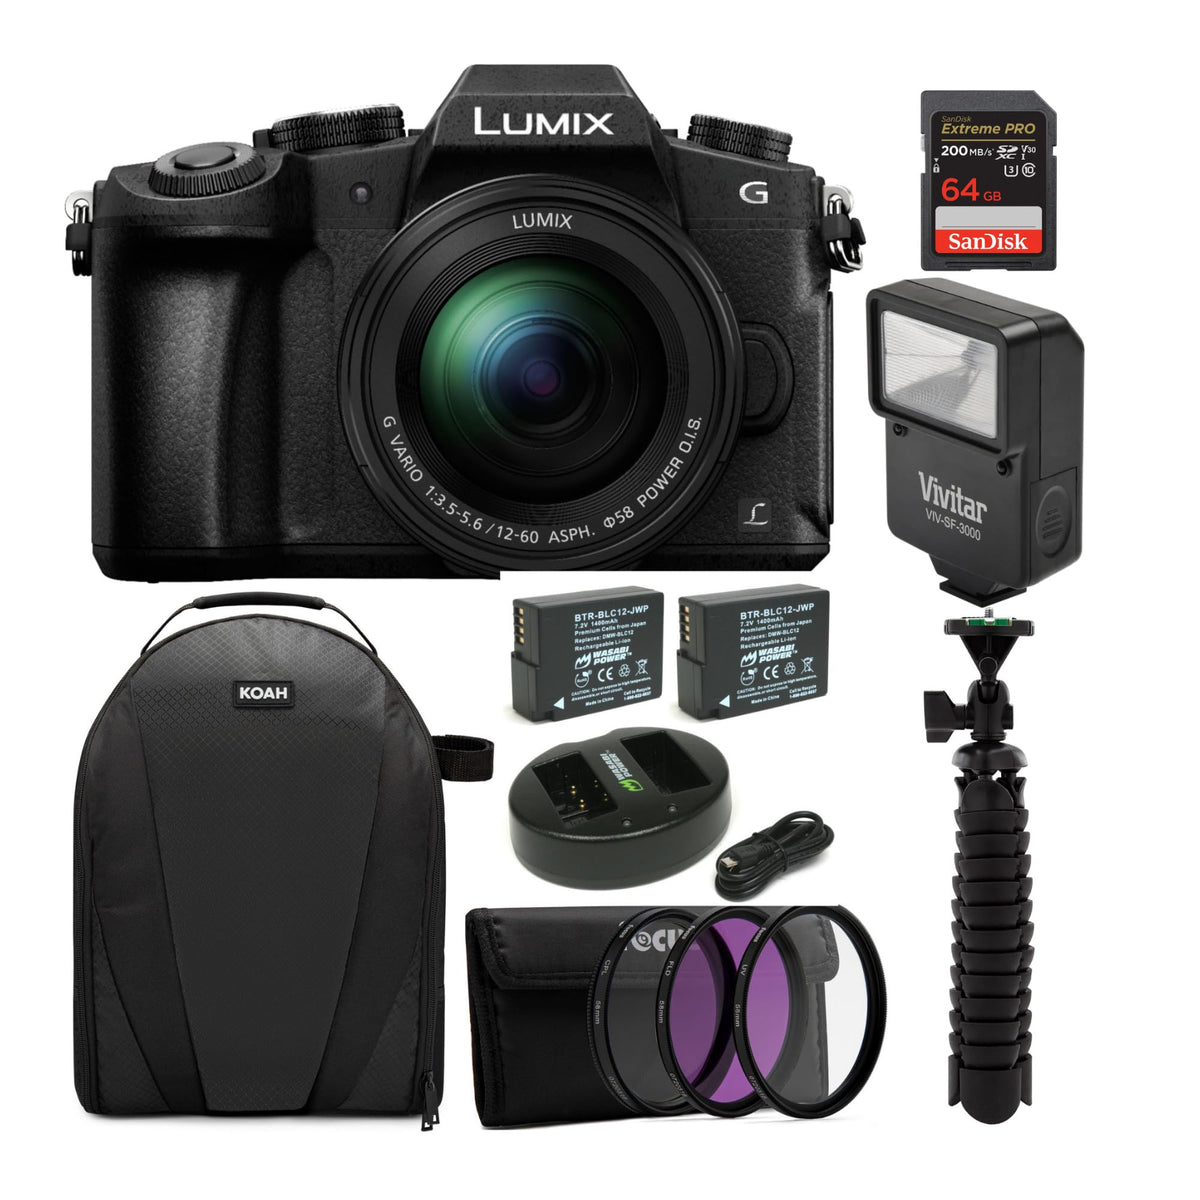 Panasonic LUMIX G85MK 4K Mirrorless Interchangeable Lens Camera Kit with 12-60mm Lens Bundle with 64GB Memory Card, Camera Accessories, Backpack, Spider Tripod, Filter Kit, and Flash (7 Items)